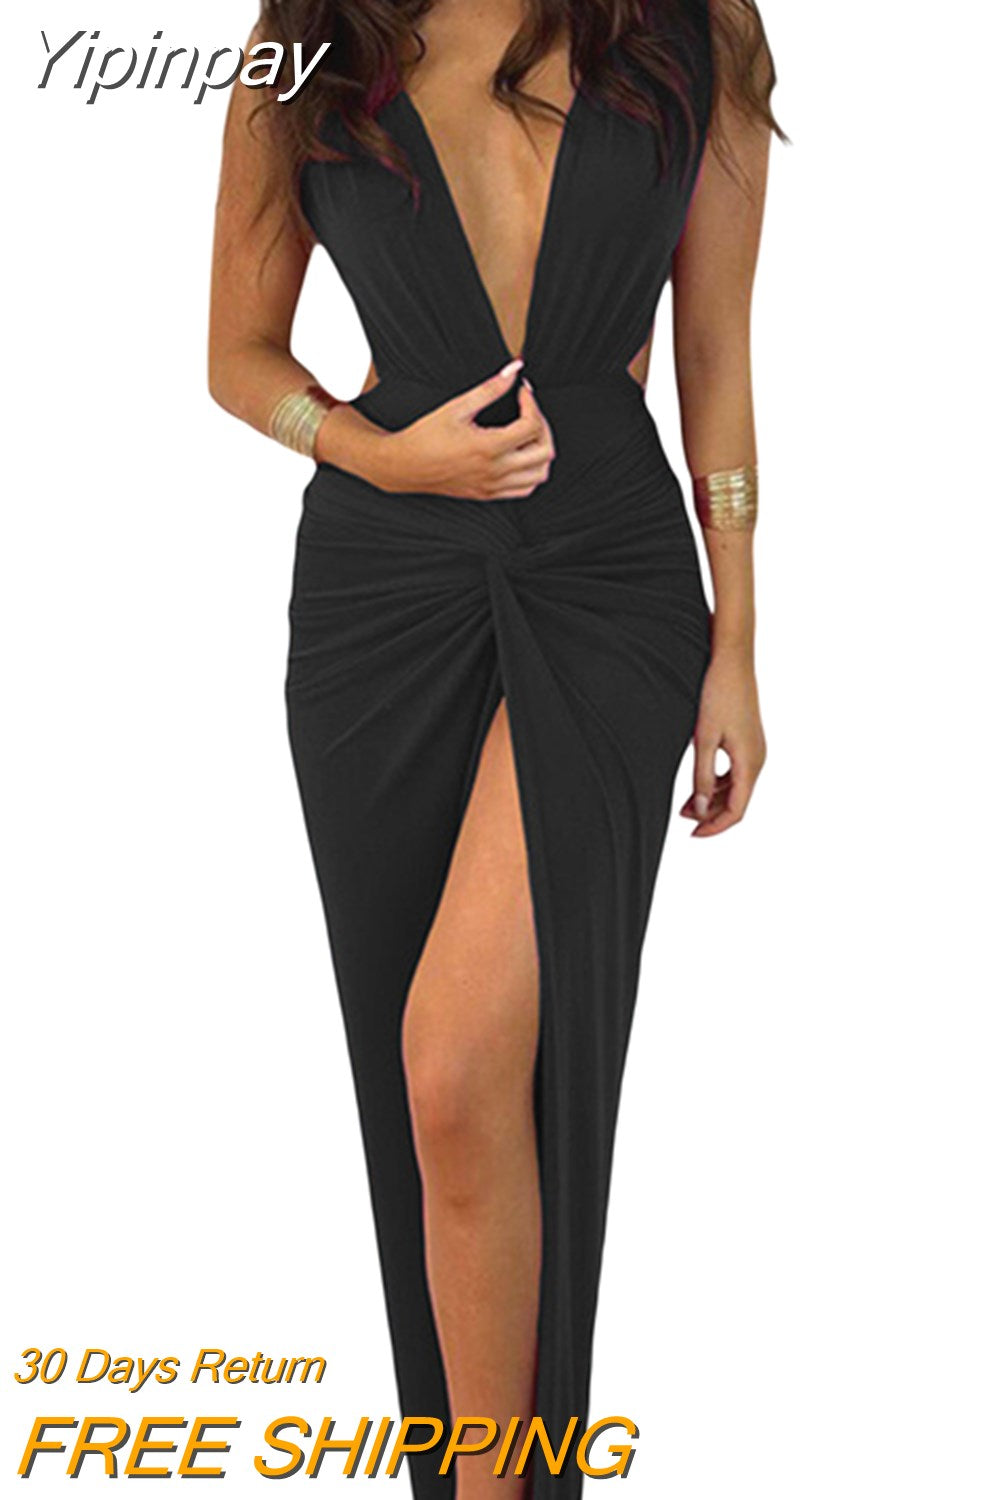 Yipinpay Backless Wrapped Slit Bodycon Dress for Women Summer Elegant Fashion Sleeveless Deep V Neck Twist Ruched Long Tank Dress